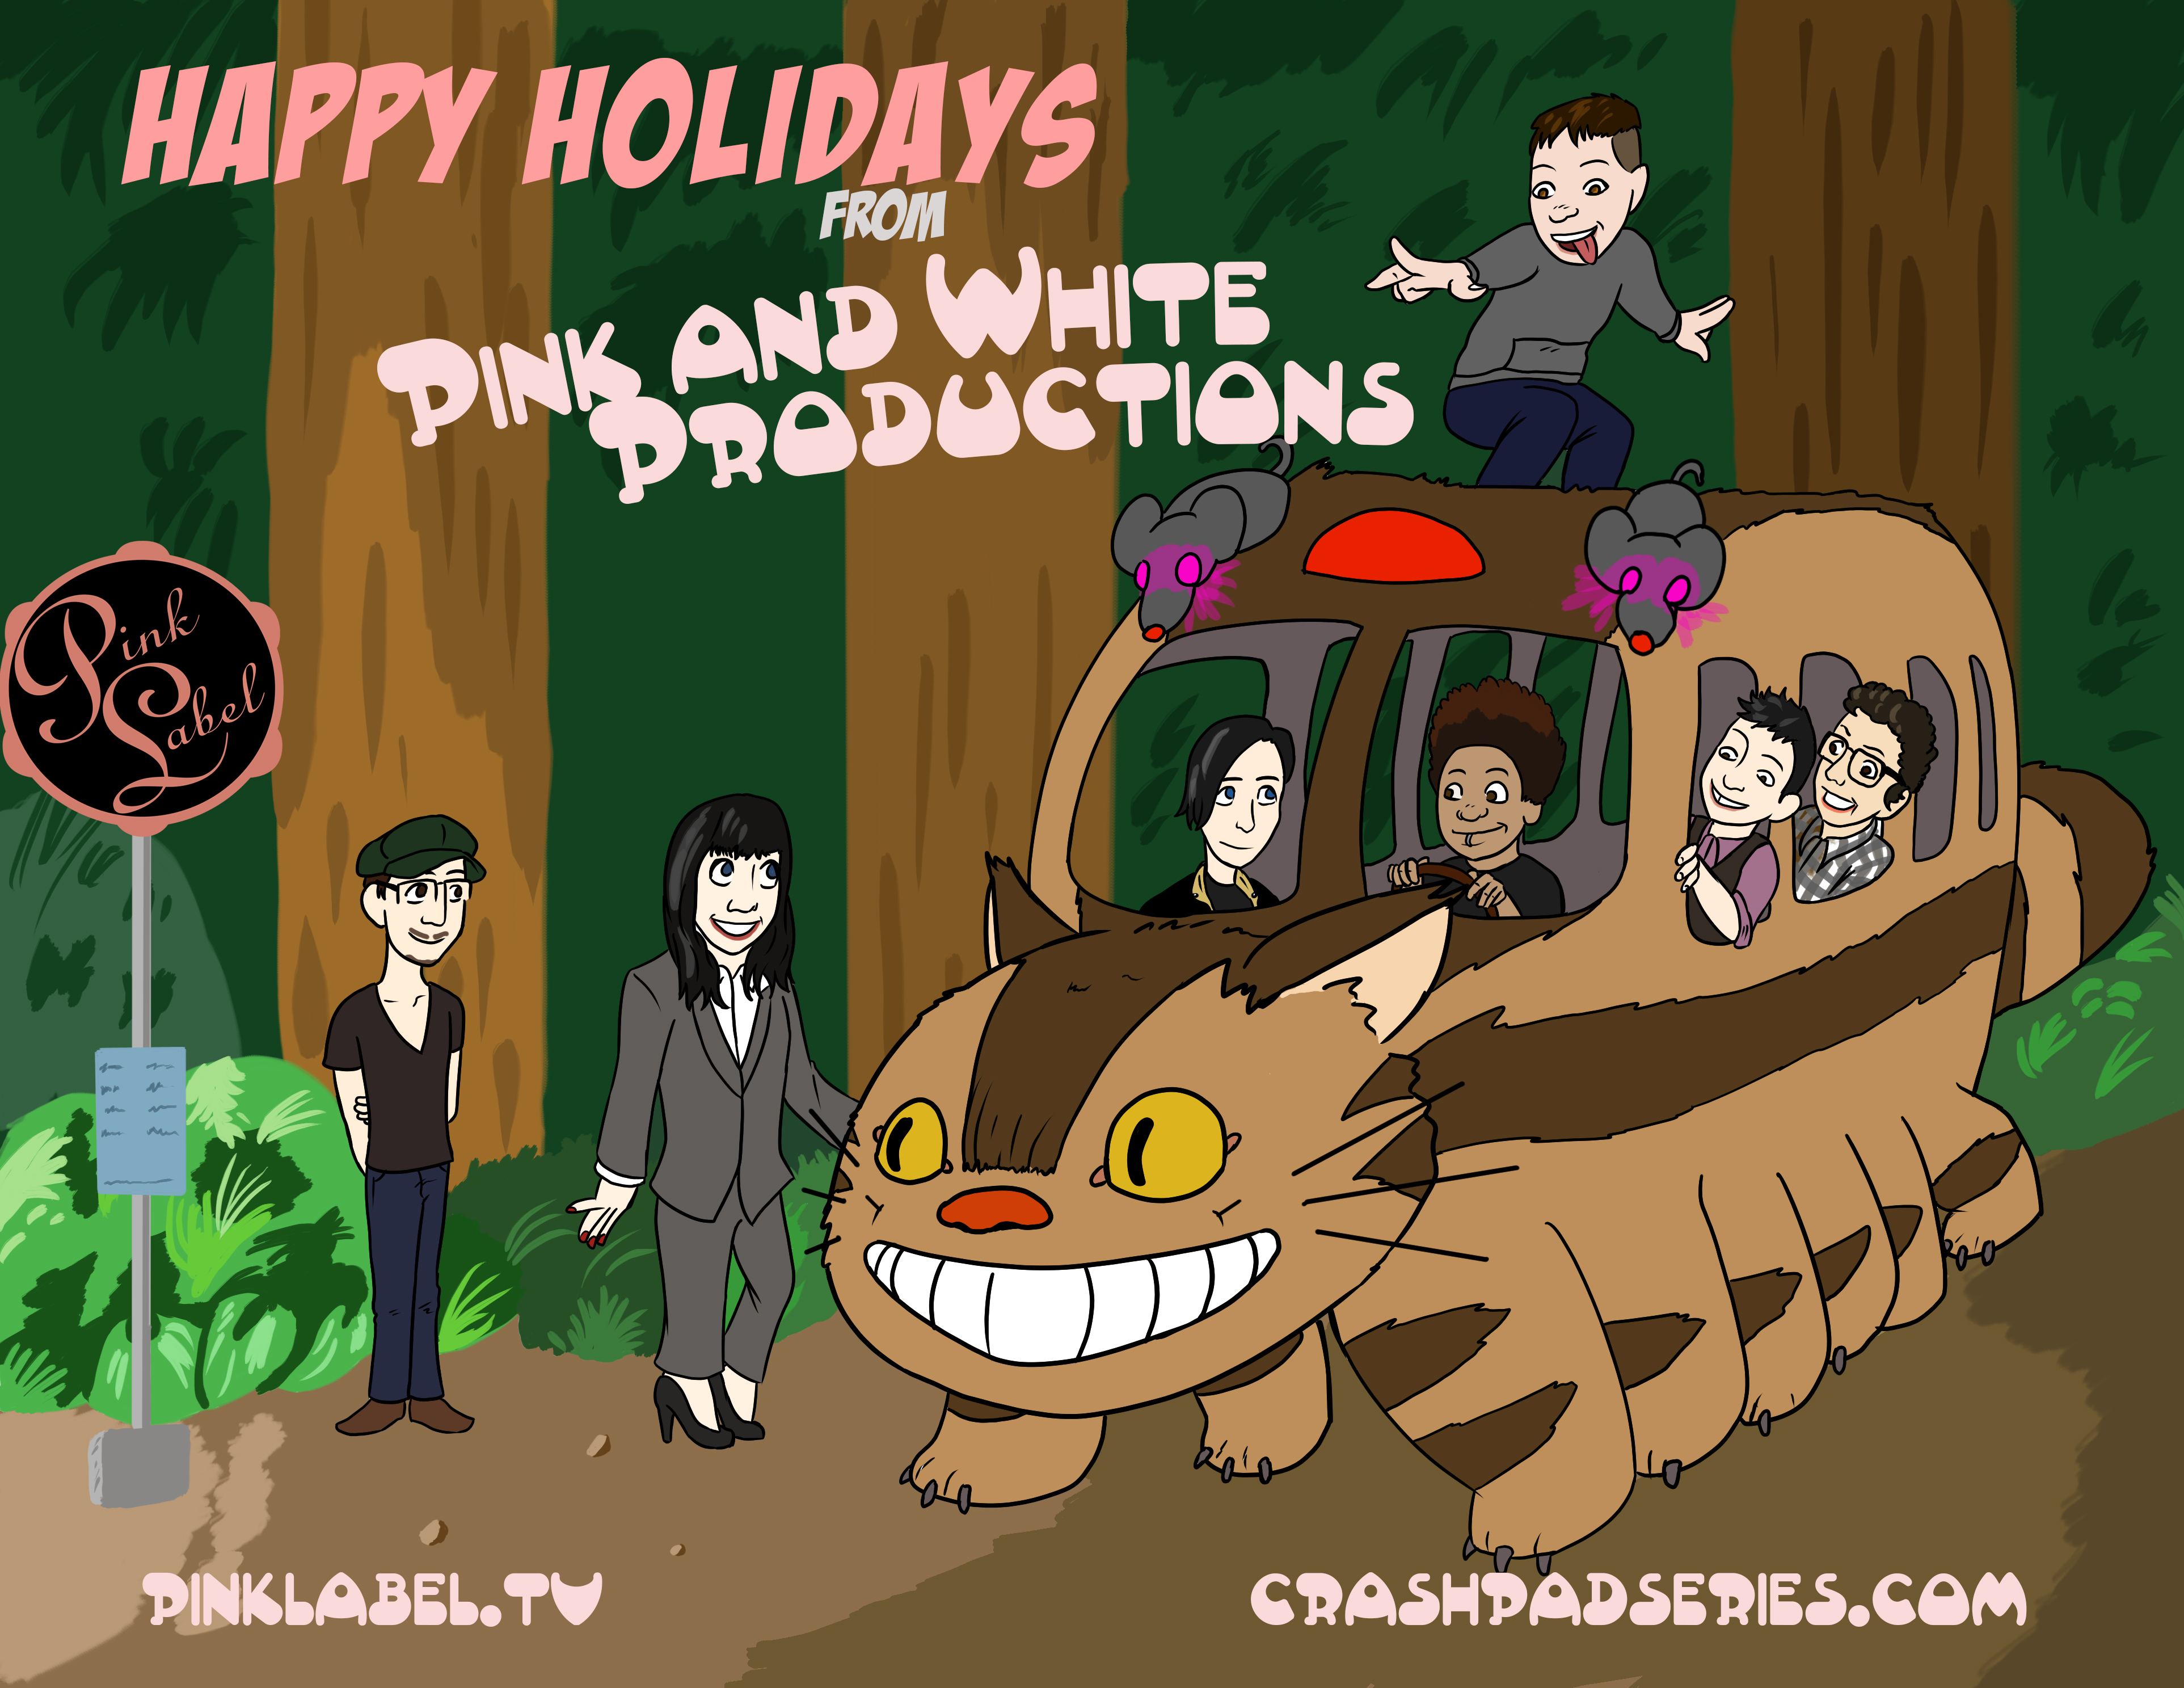 Pink & White Productions Holidays